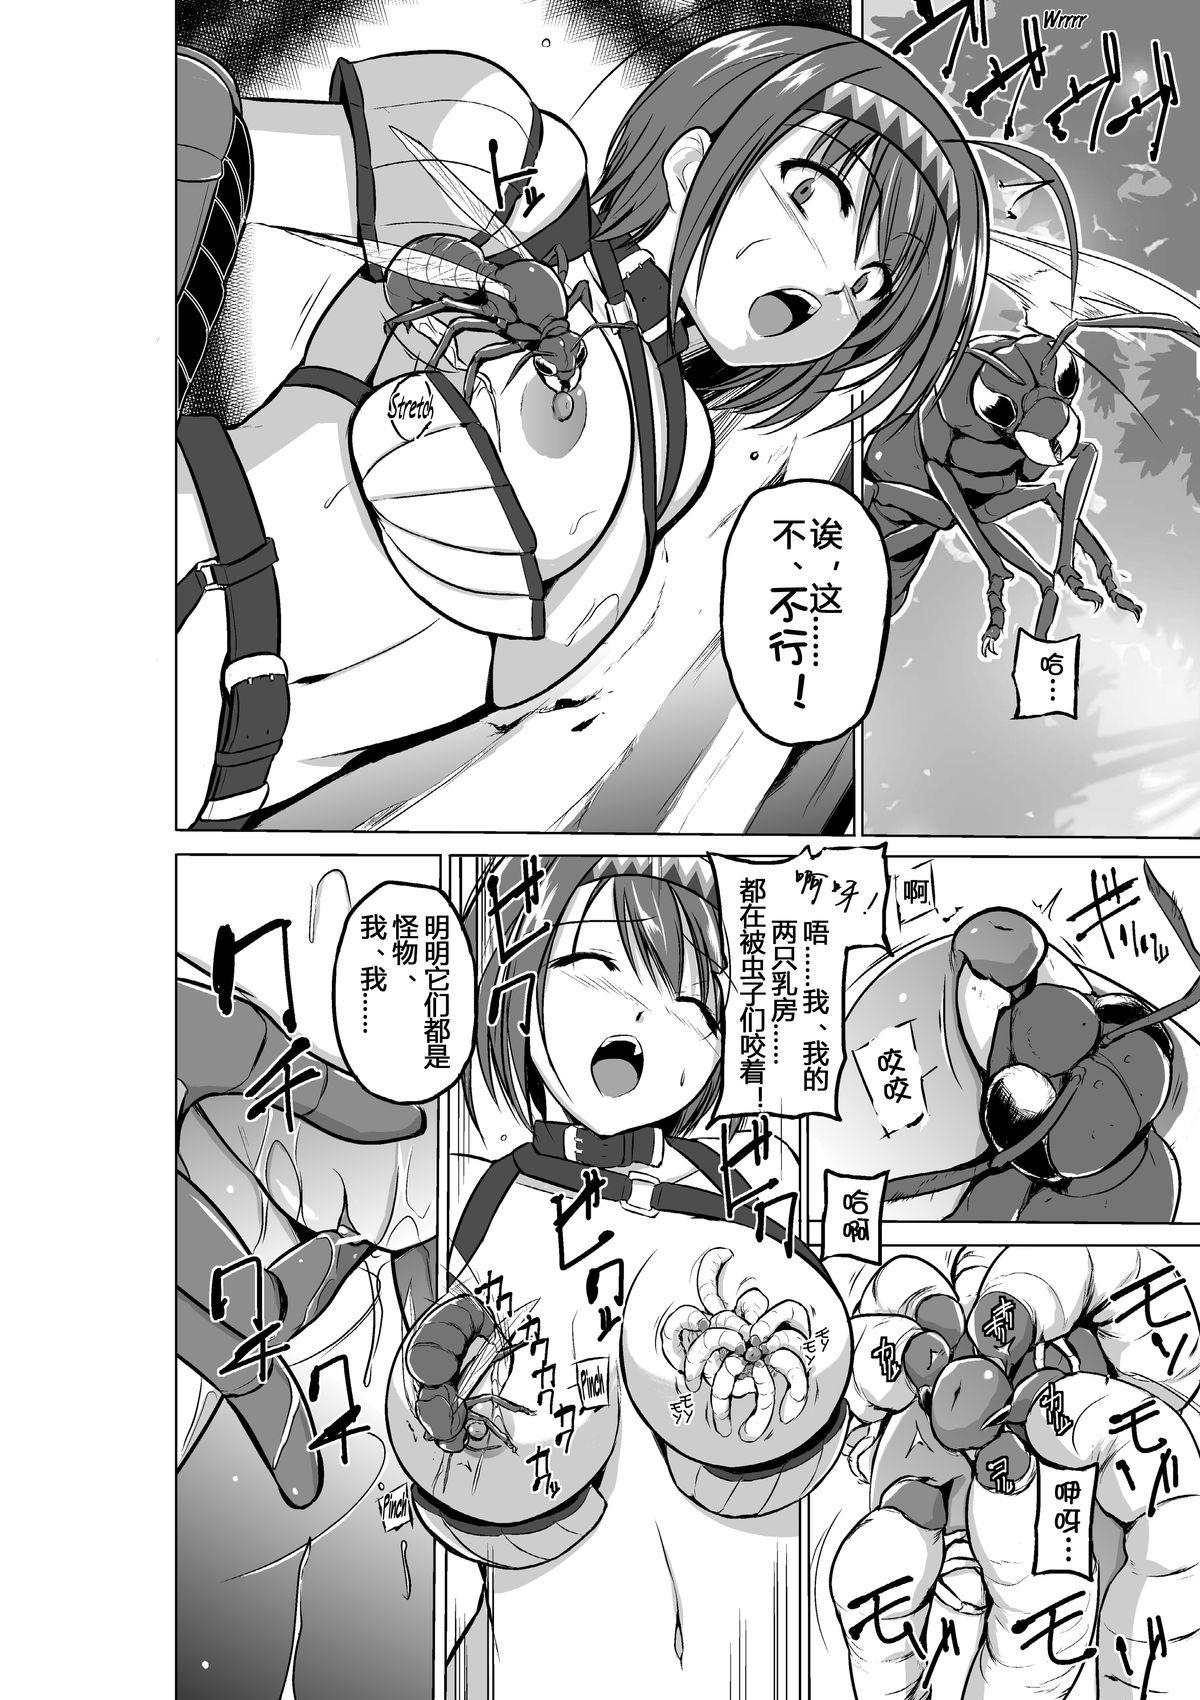 Gay Baitbus Dungeon Travelers - Chie no Himegoto - Toheart2 Step - Page 8